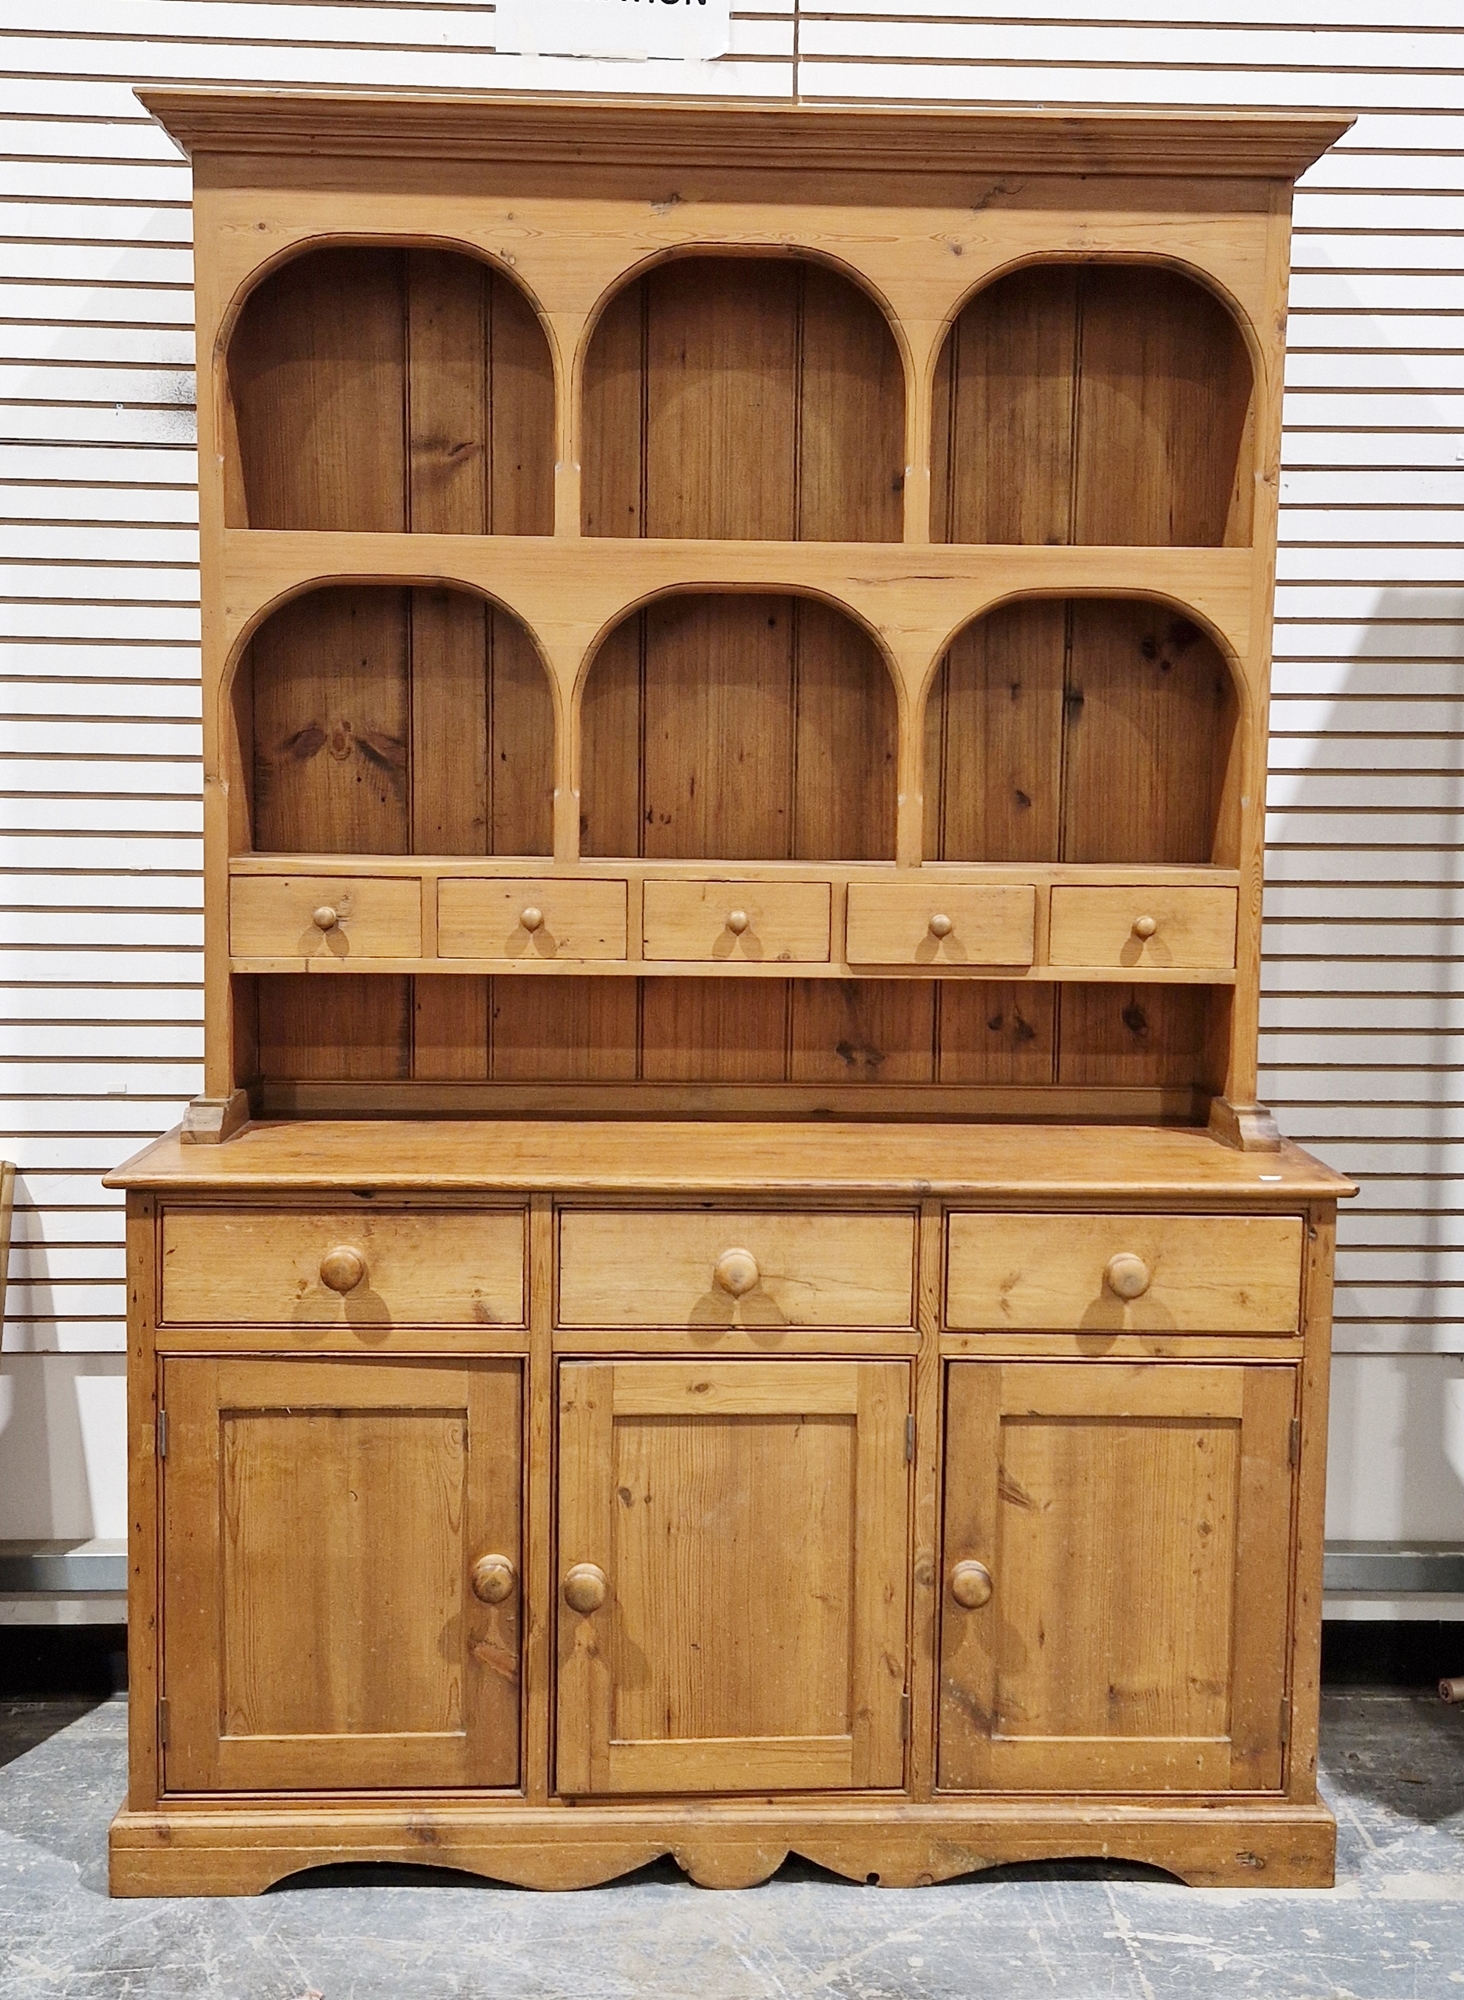 19th century pine kitchen dresser, the top section with two plateracks and five short drawers, the